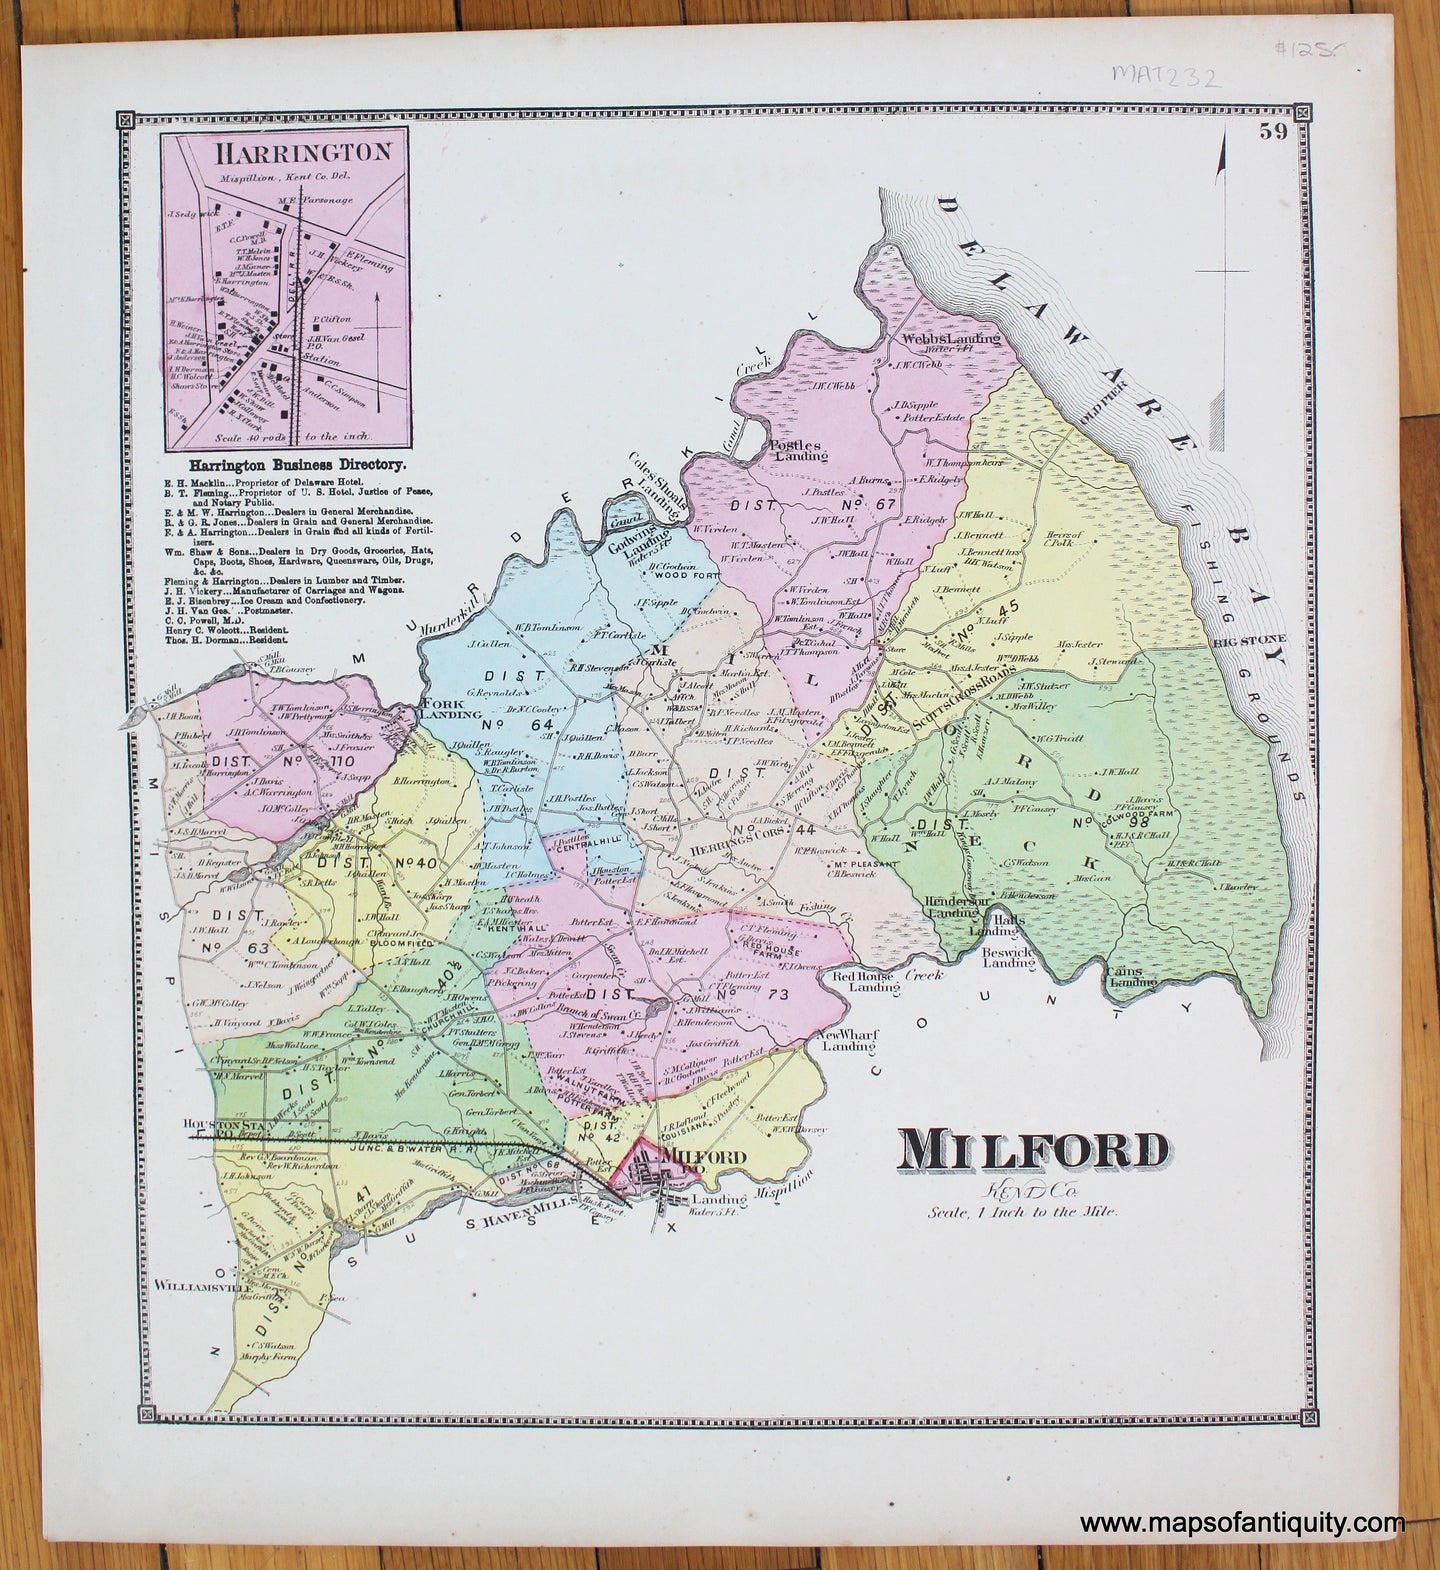 Milford-Antique-Map-1868-Beers-1860s-1800s-19th-century-Maps-of-Antiquity